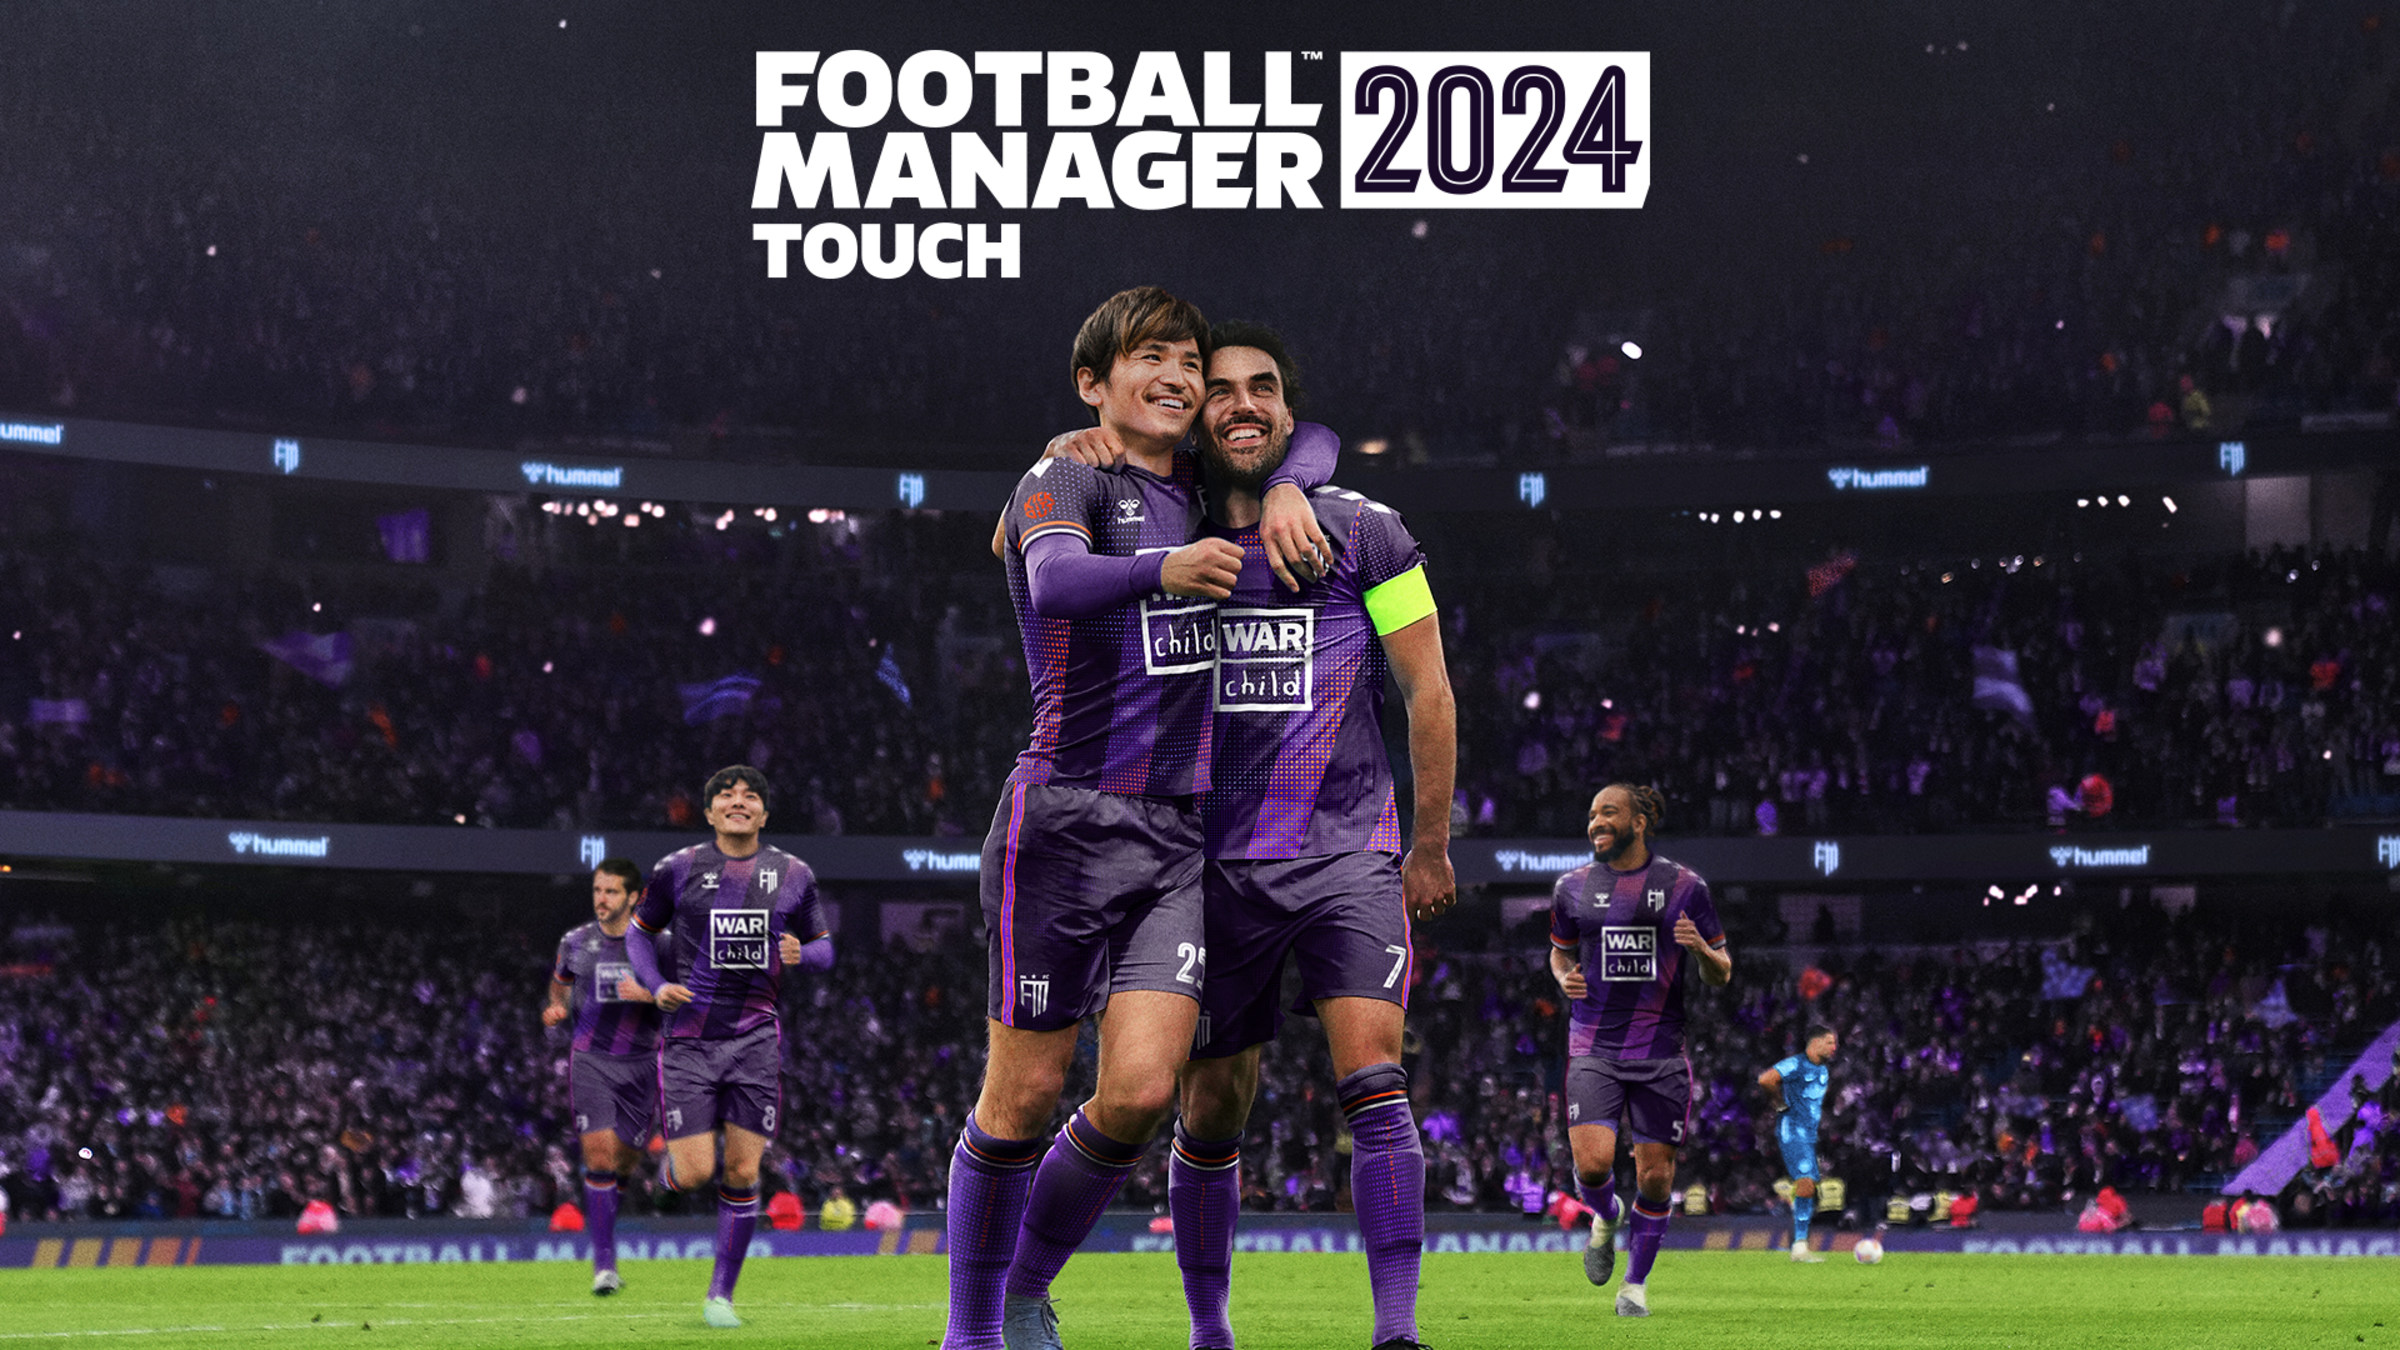 Football Manager 2024 Touch pour Nintendo Switch - Site officiel Nintendo